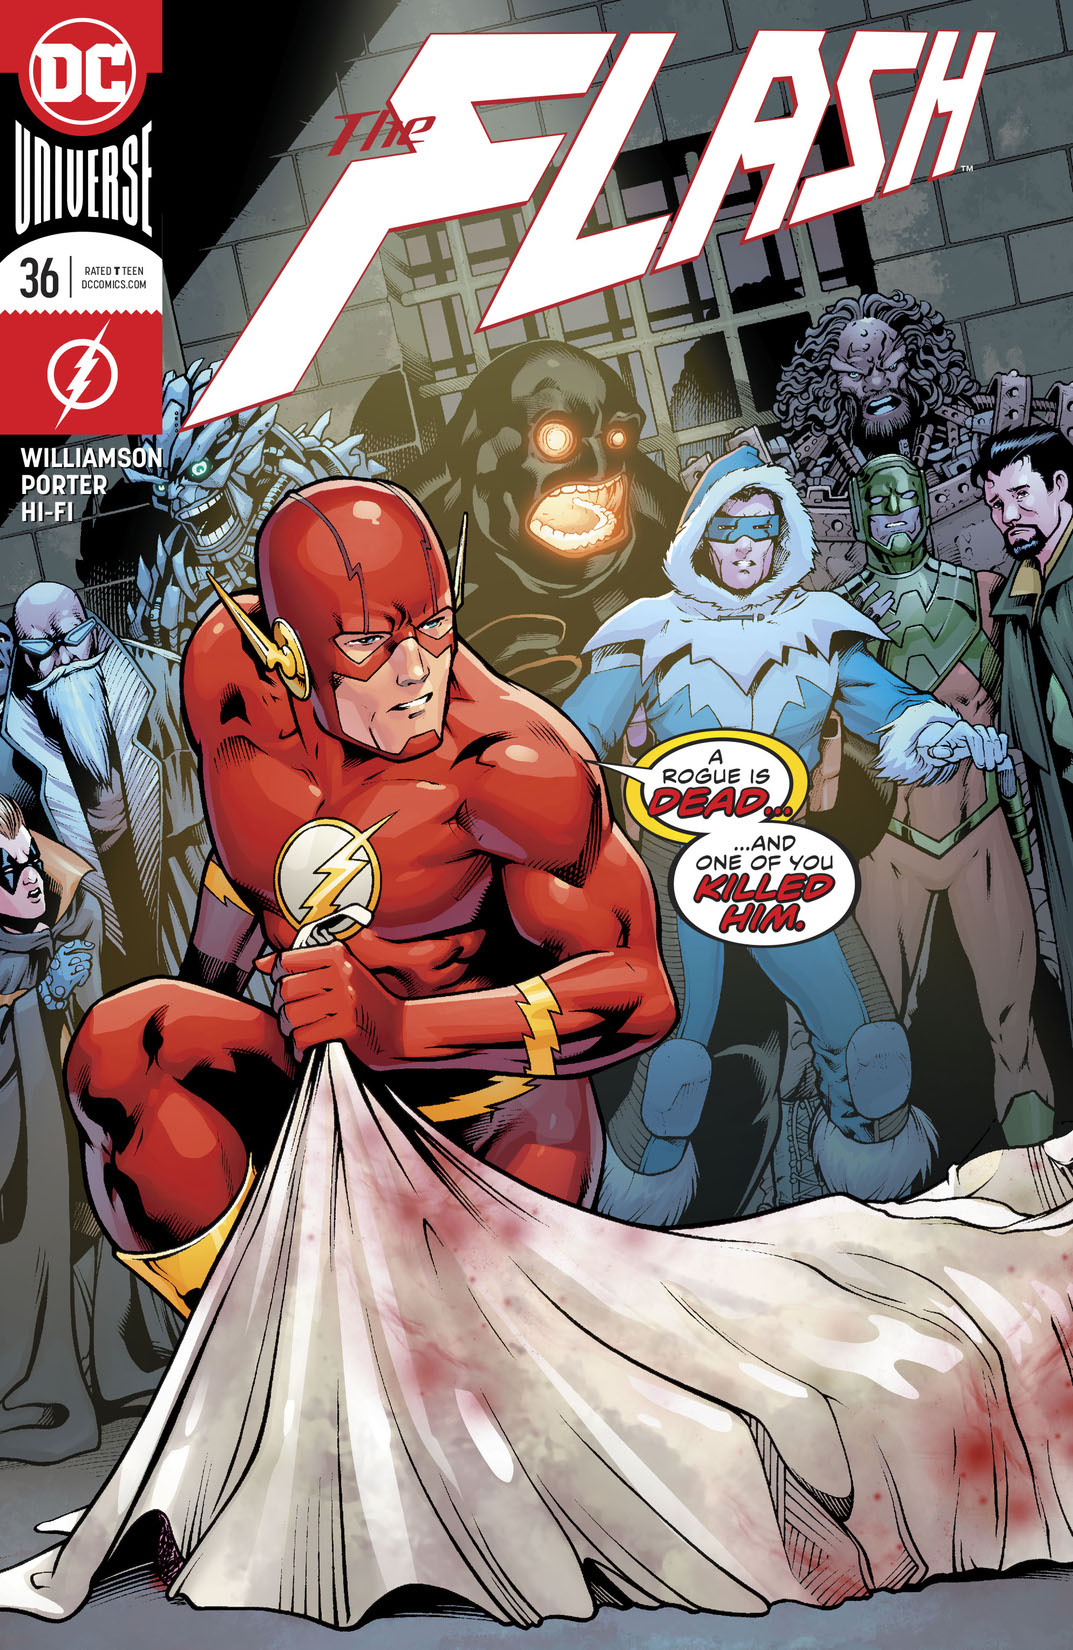 The Flash (2016-) #36 preview images